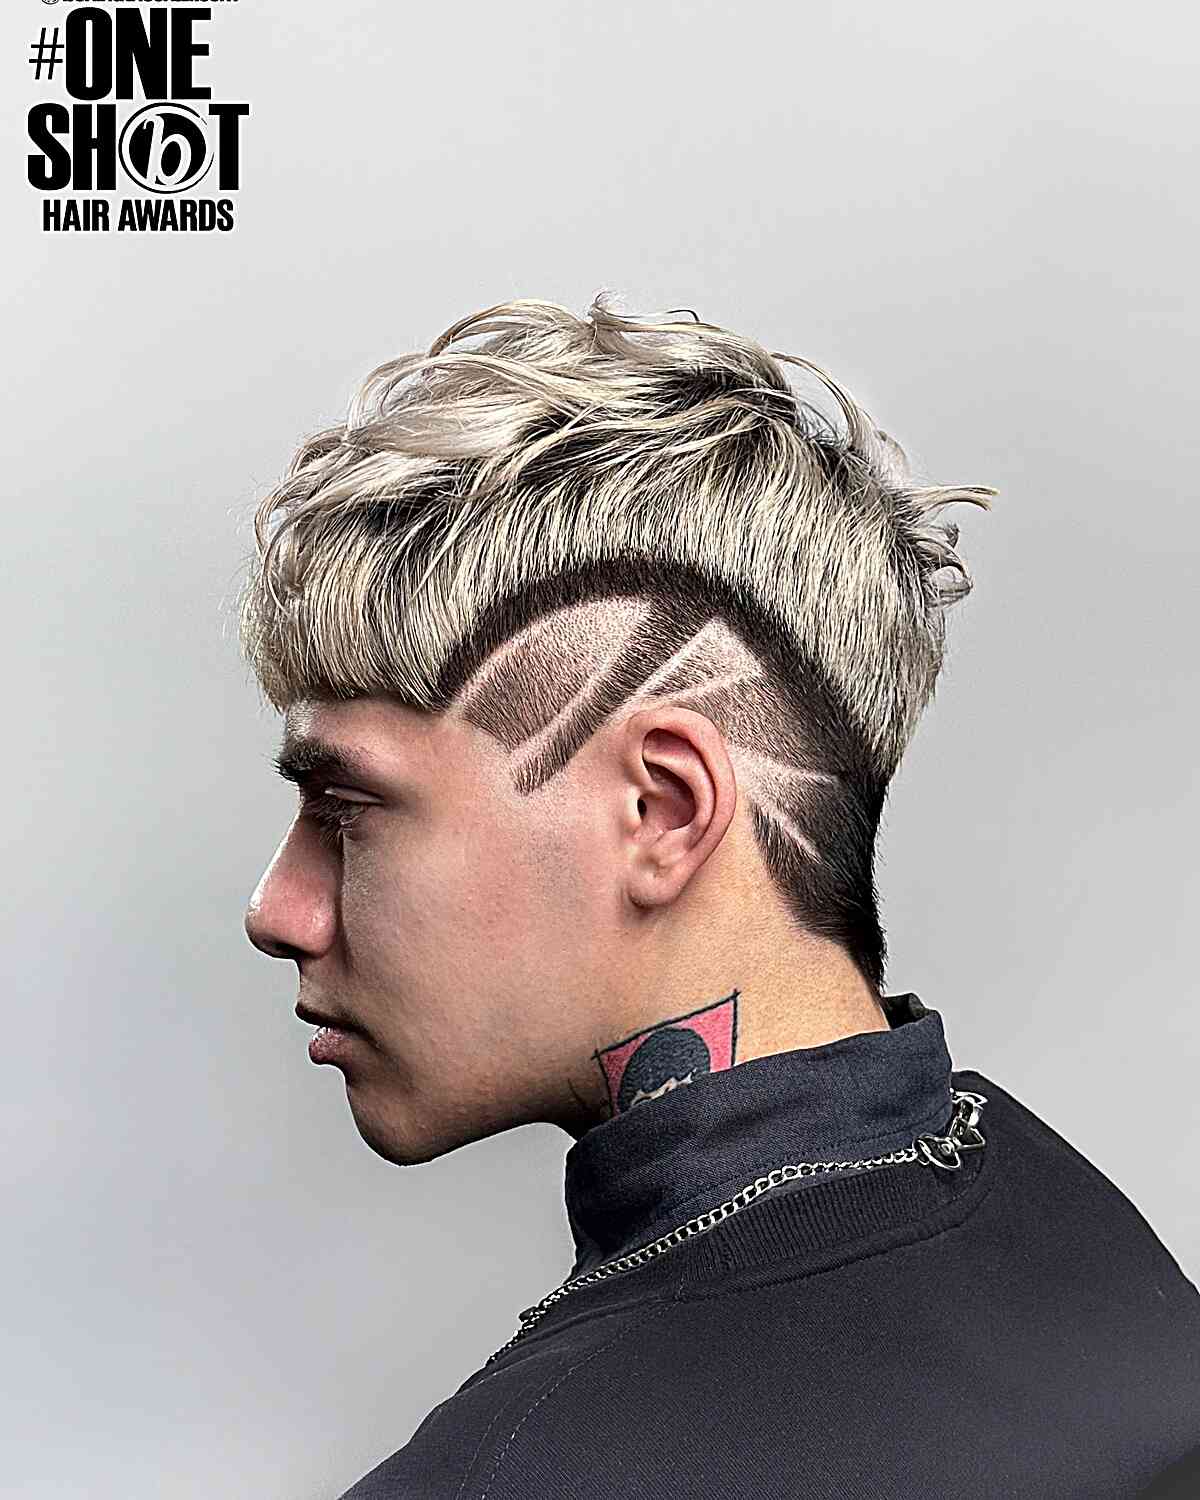 50 Creative Hair Designs for Men Worth Trying | Hair designs for men,  Dreadlock hairstyles for men, Creative hairstyles